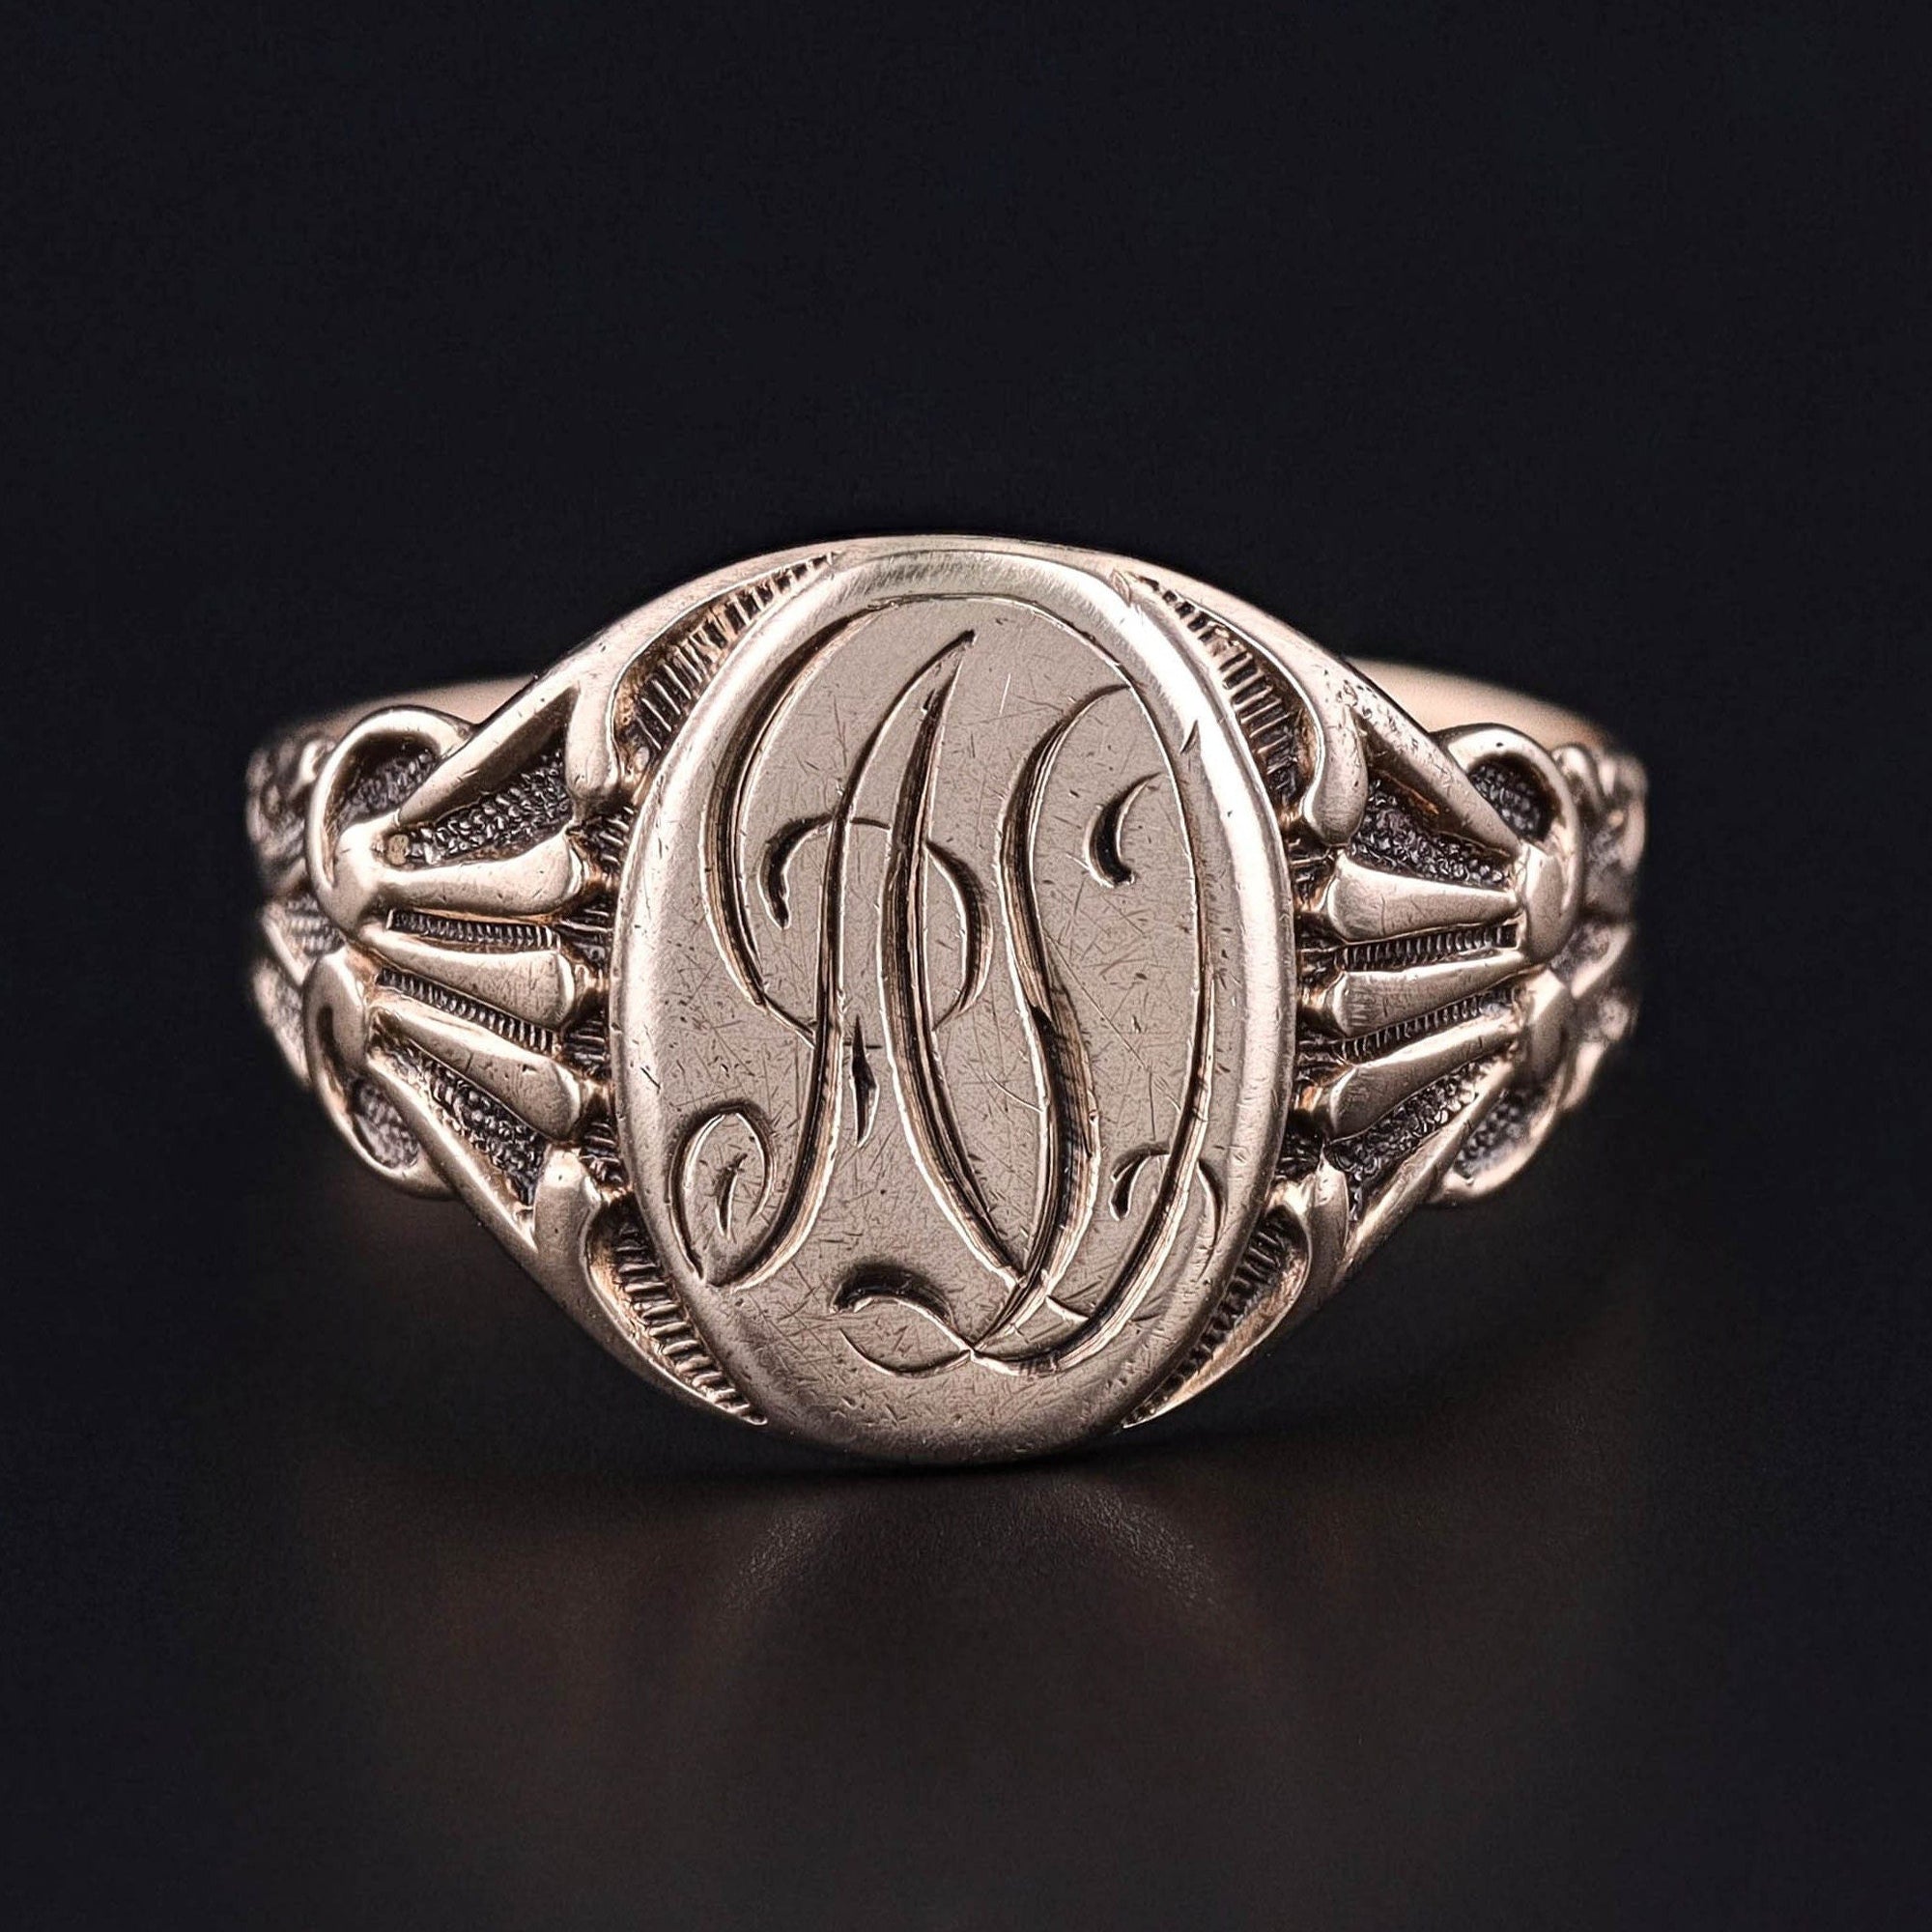 An antique signet ring with the intitials AD. Perfect for anyone who loves someone with the initials AD or anyone who has the initials AD. The ring is pale 9ct gold and in good condition with light surface wear.